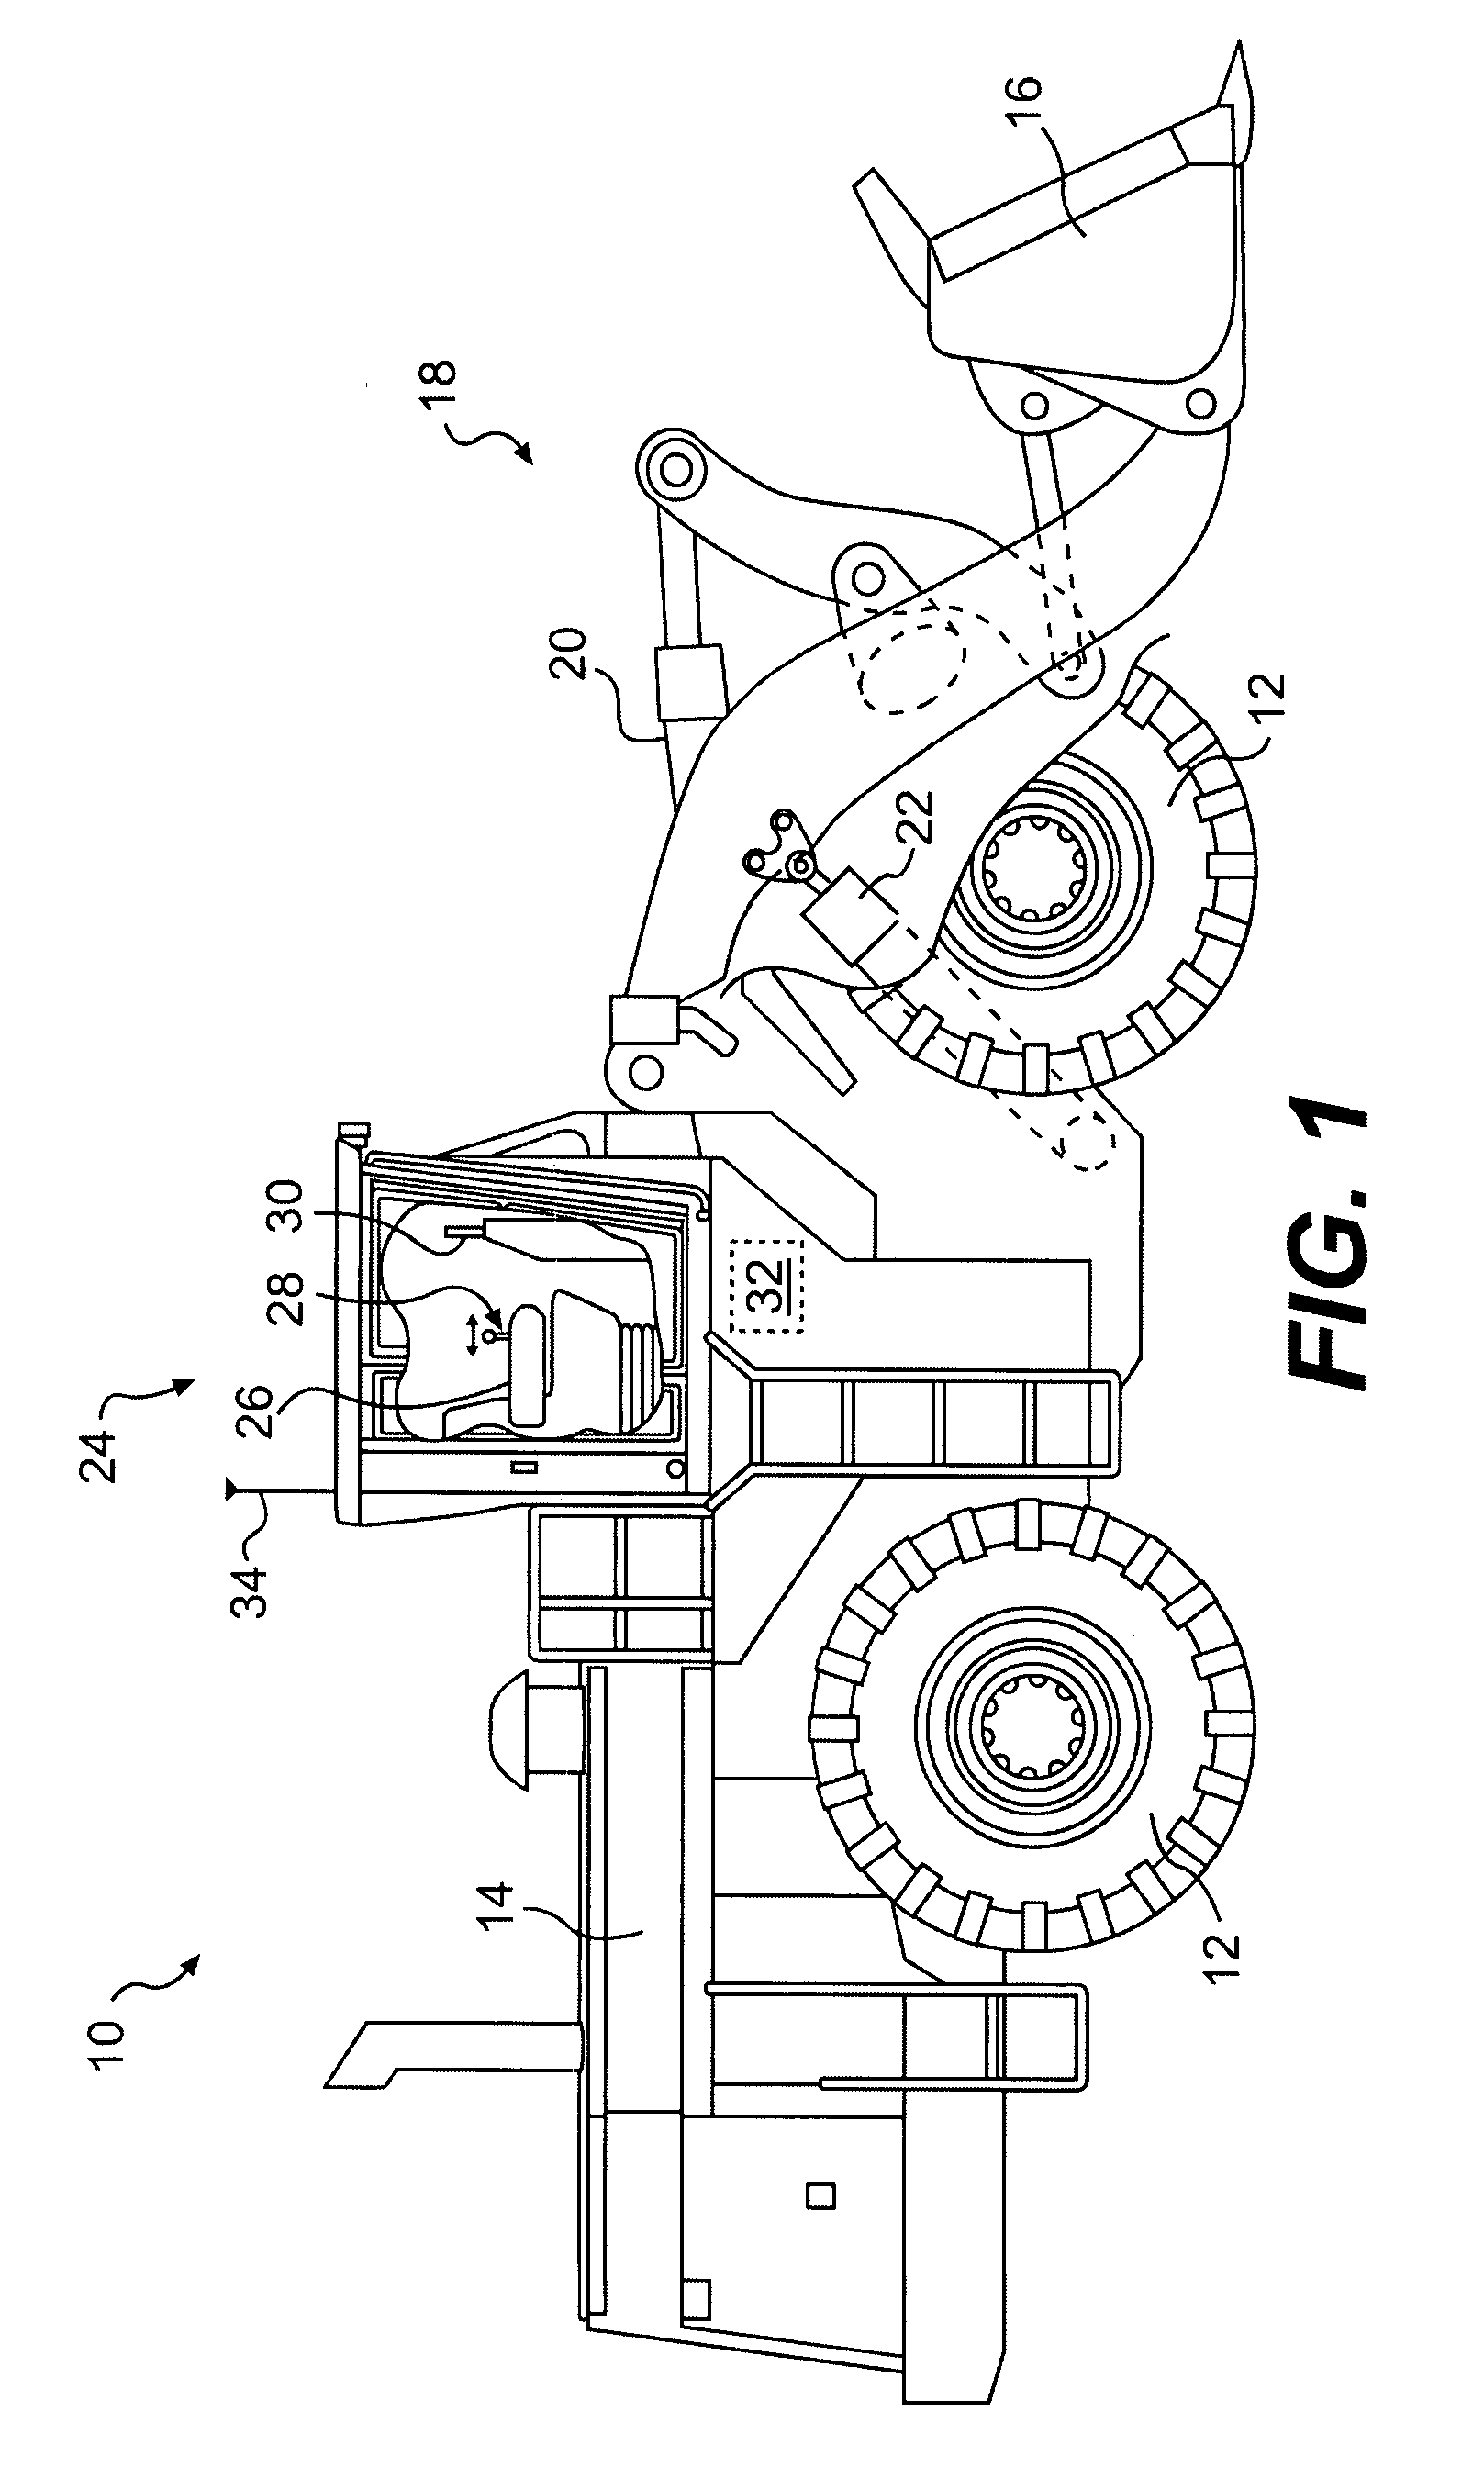 Machine to-machine communication system for payload control